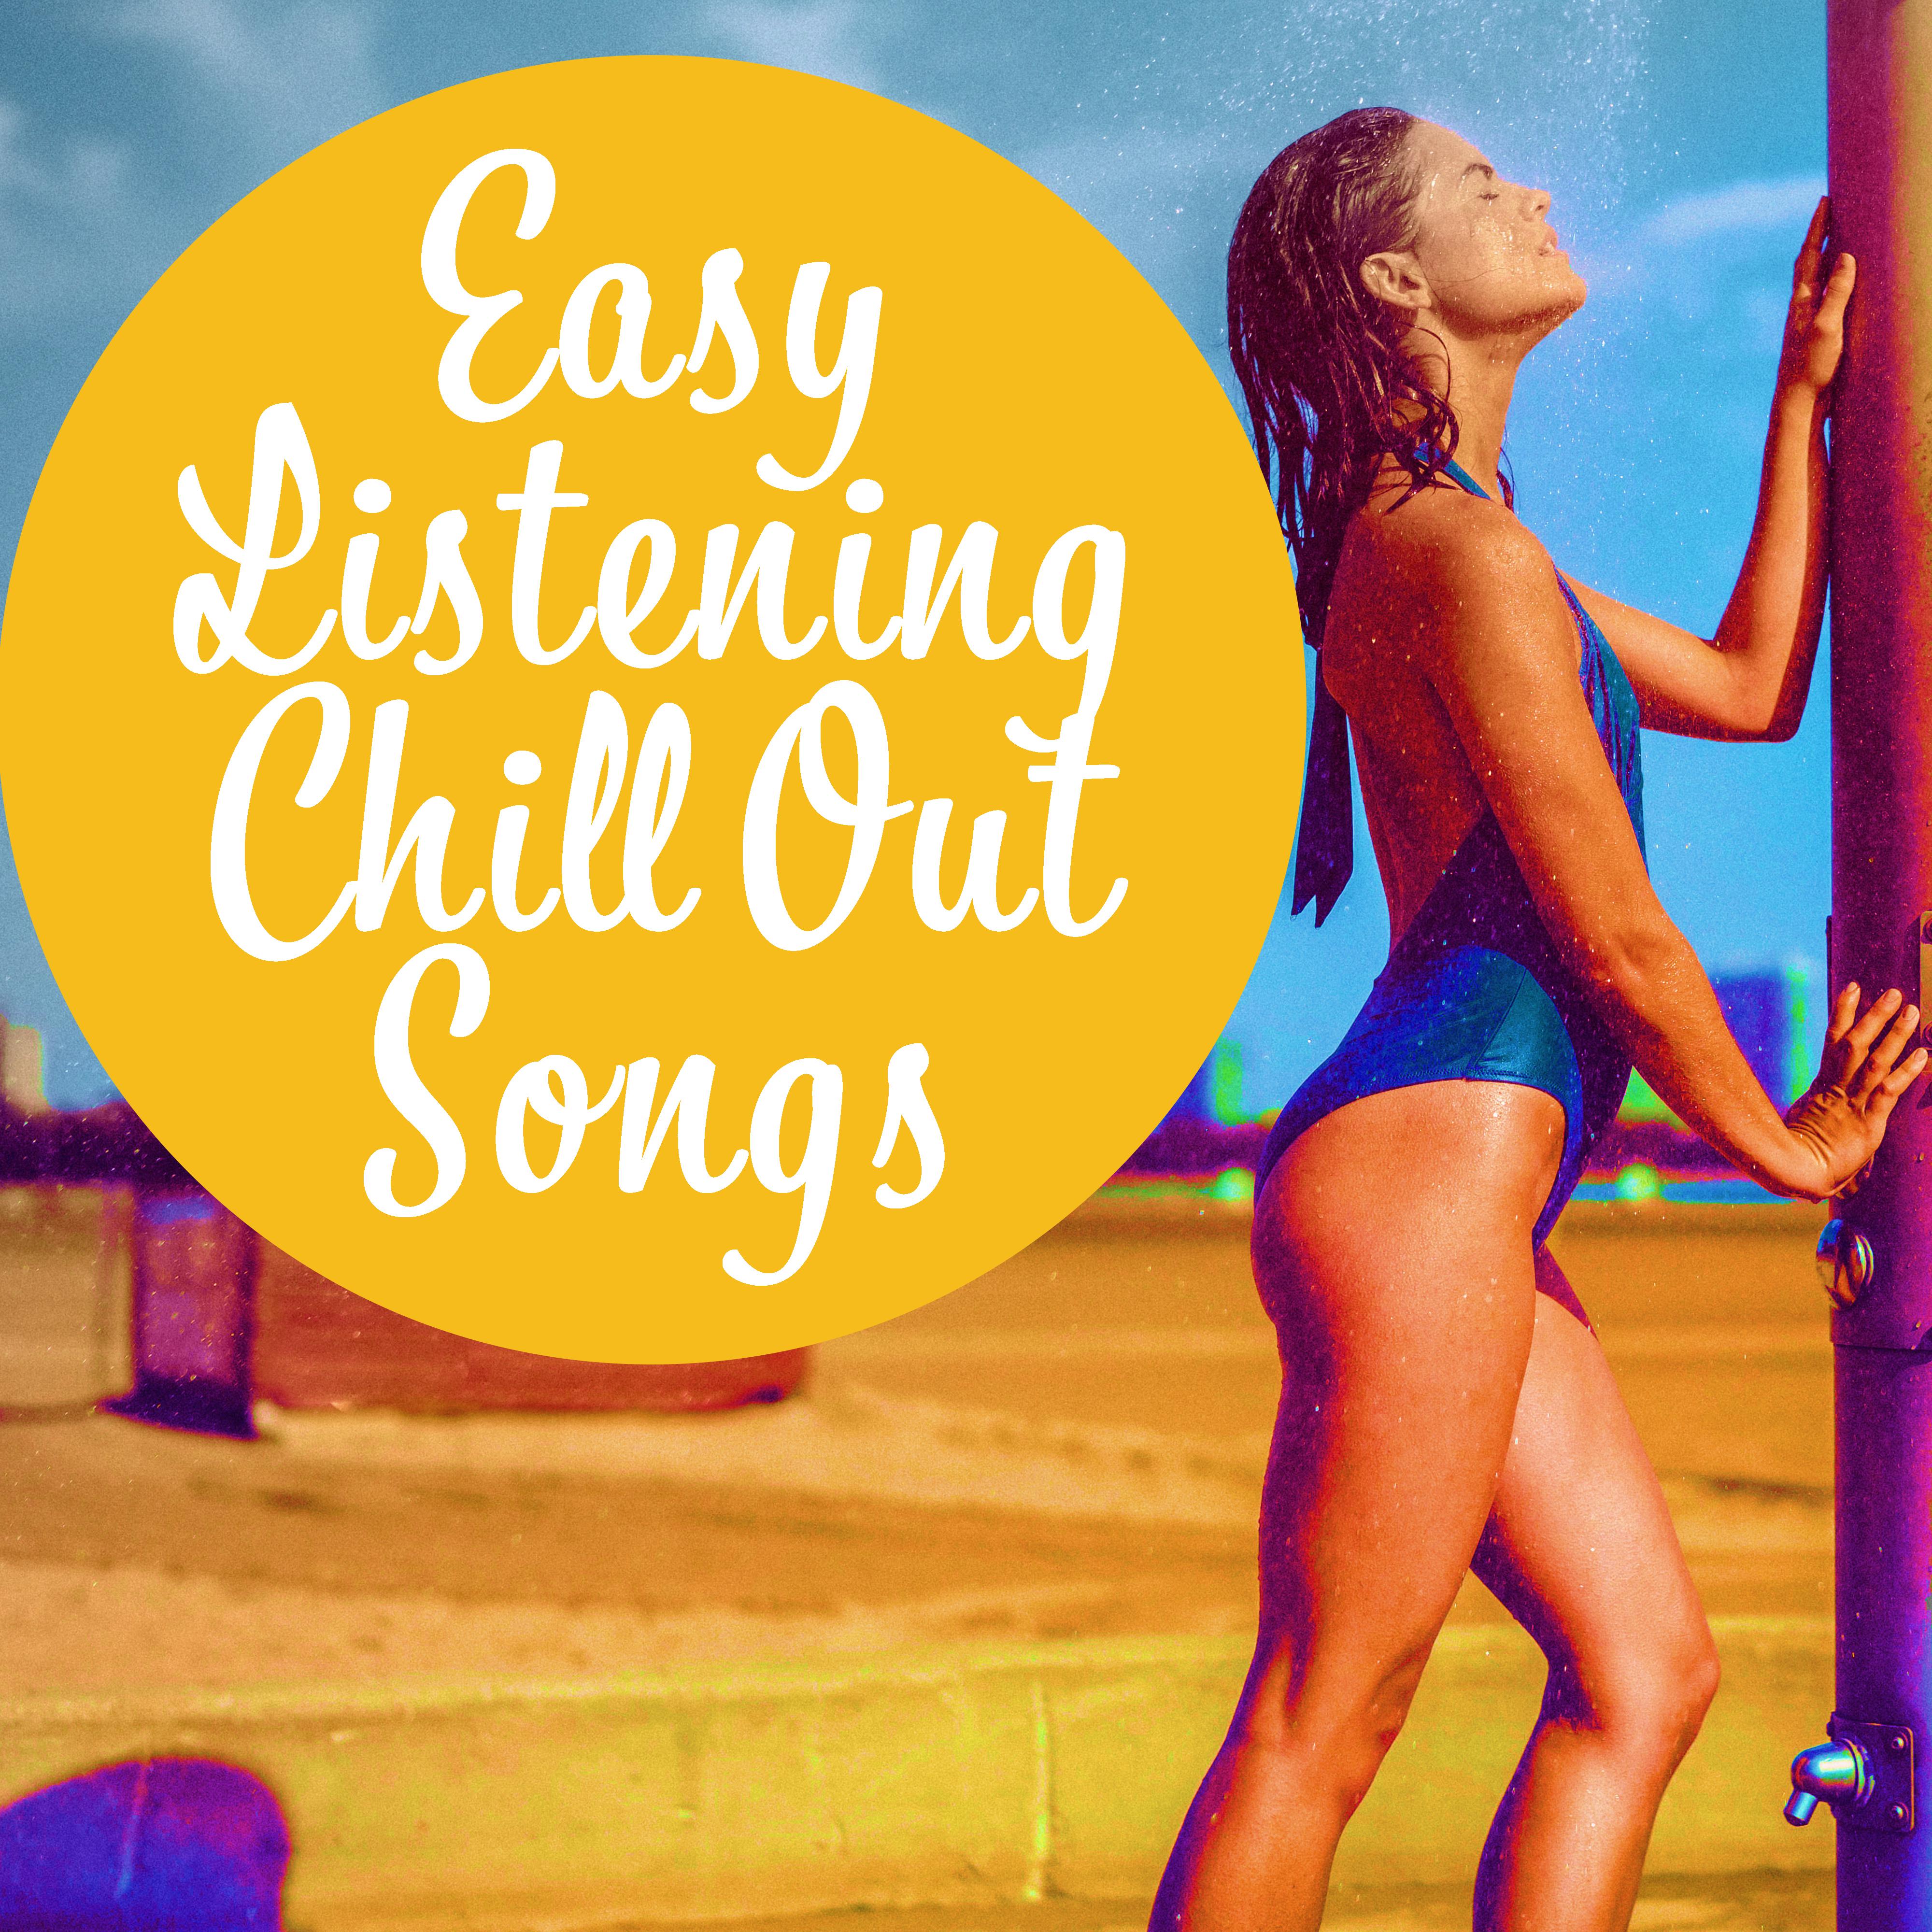 Easy Listening Chill Out Songs  Summer Music, Peaceful Sounds, Chill Out 2017, Relaxing Melodies